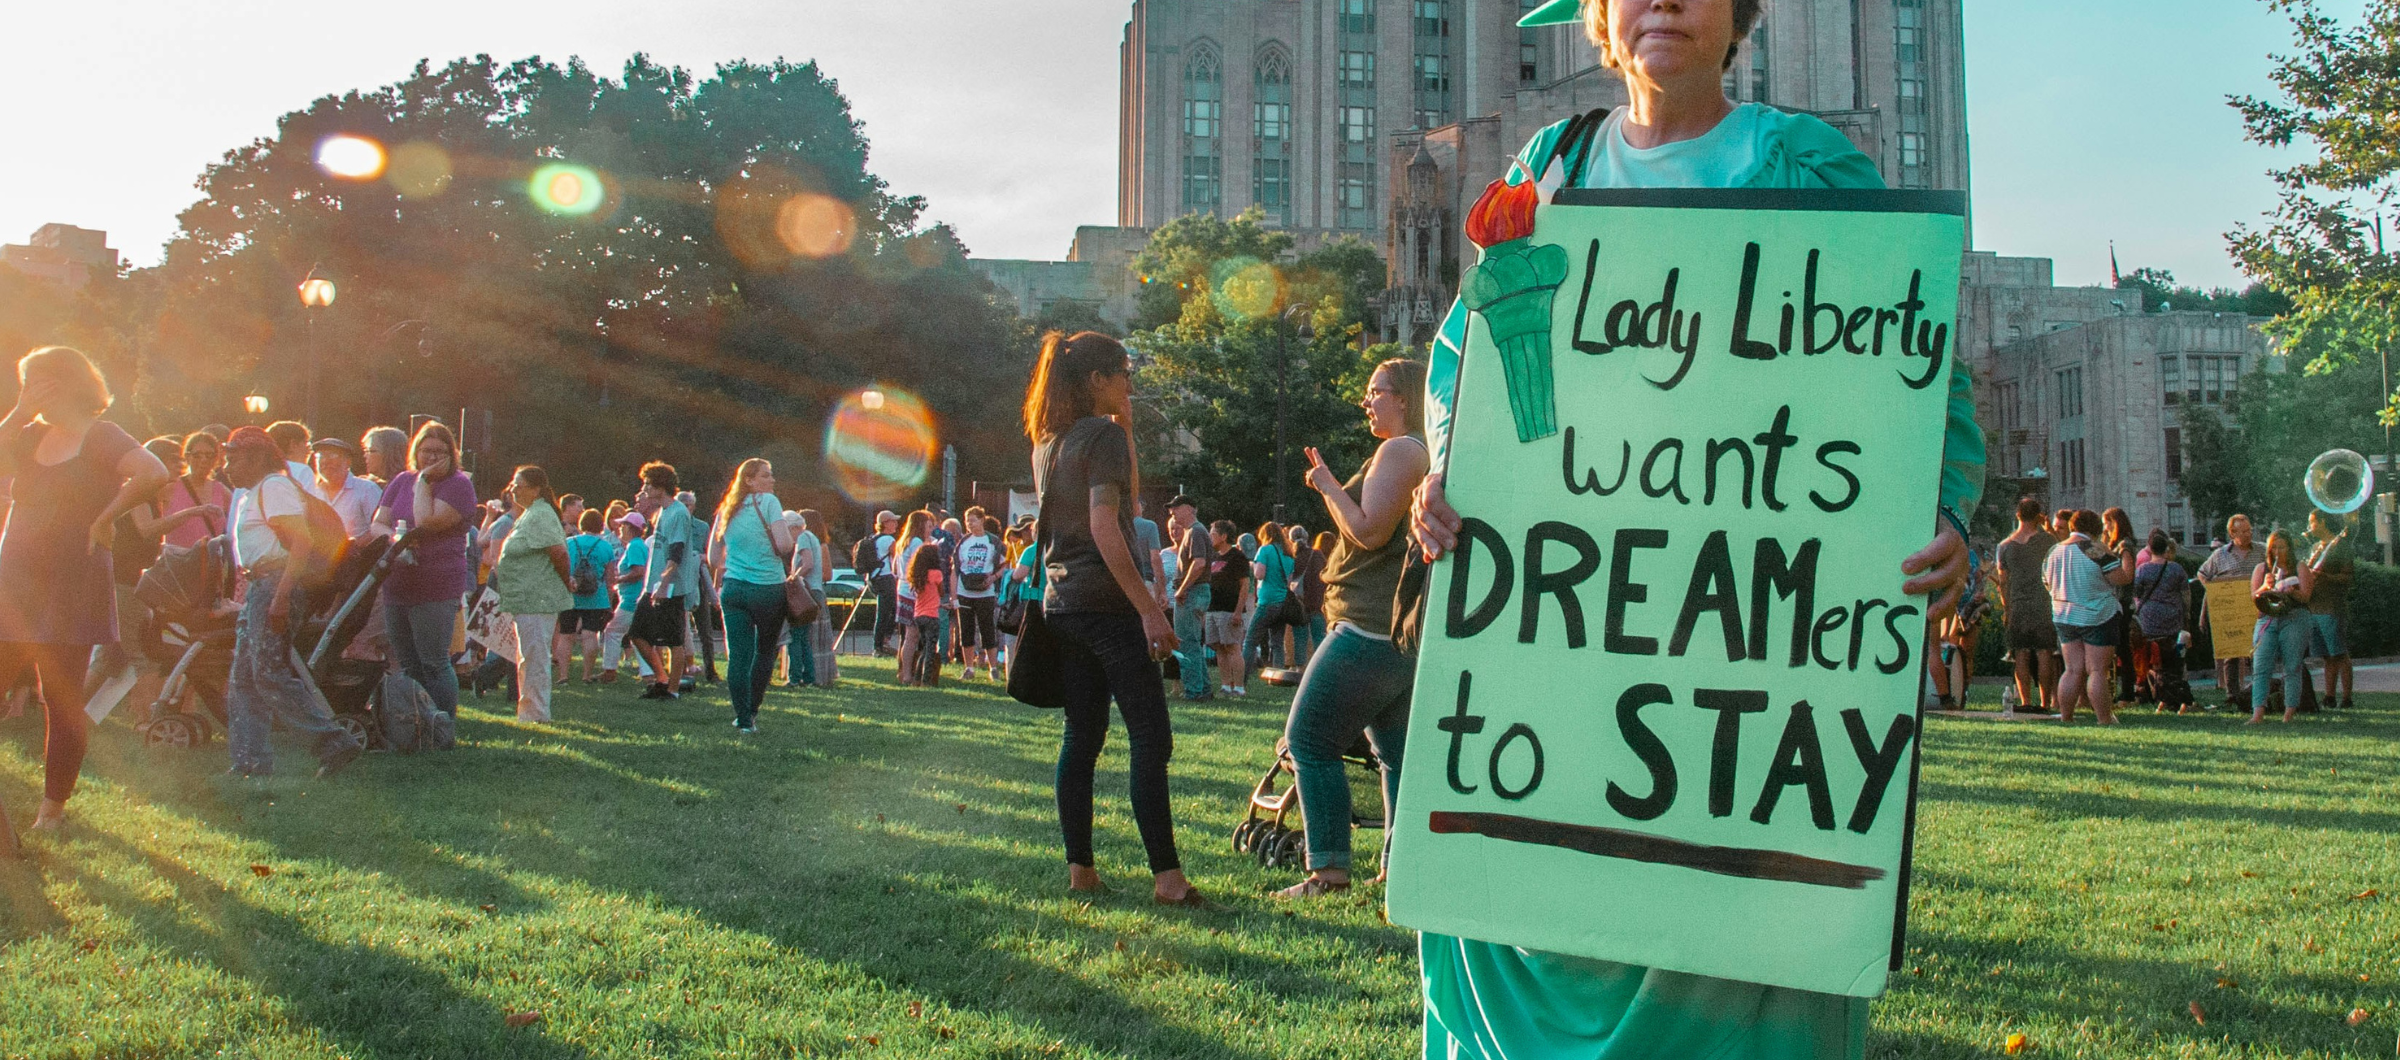 a protester dressed as Lady Liberty held a protest sign that says "Lady Liberty Wants Dreamers to Stay."